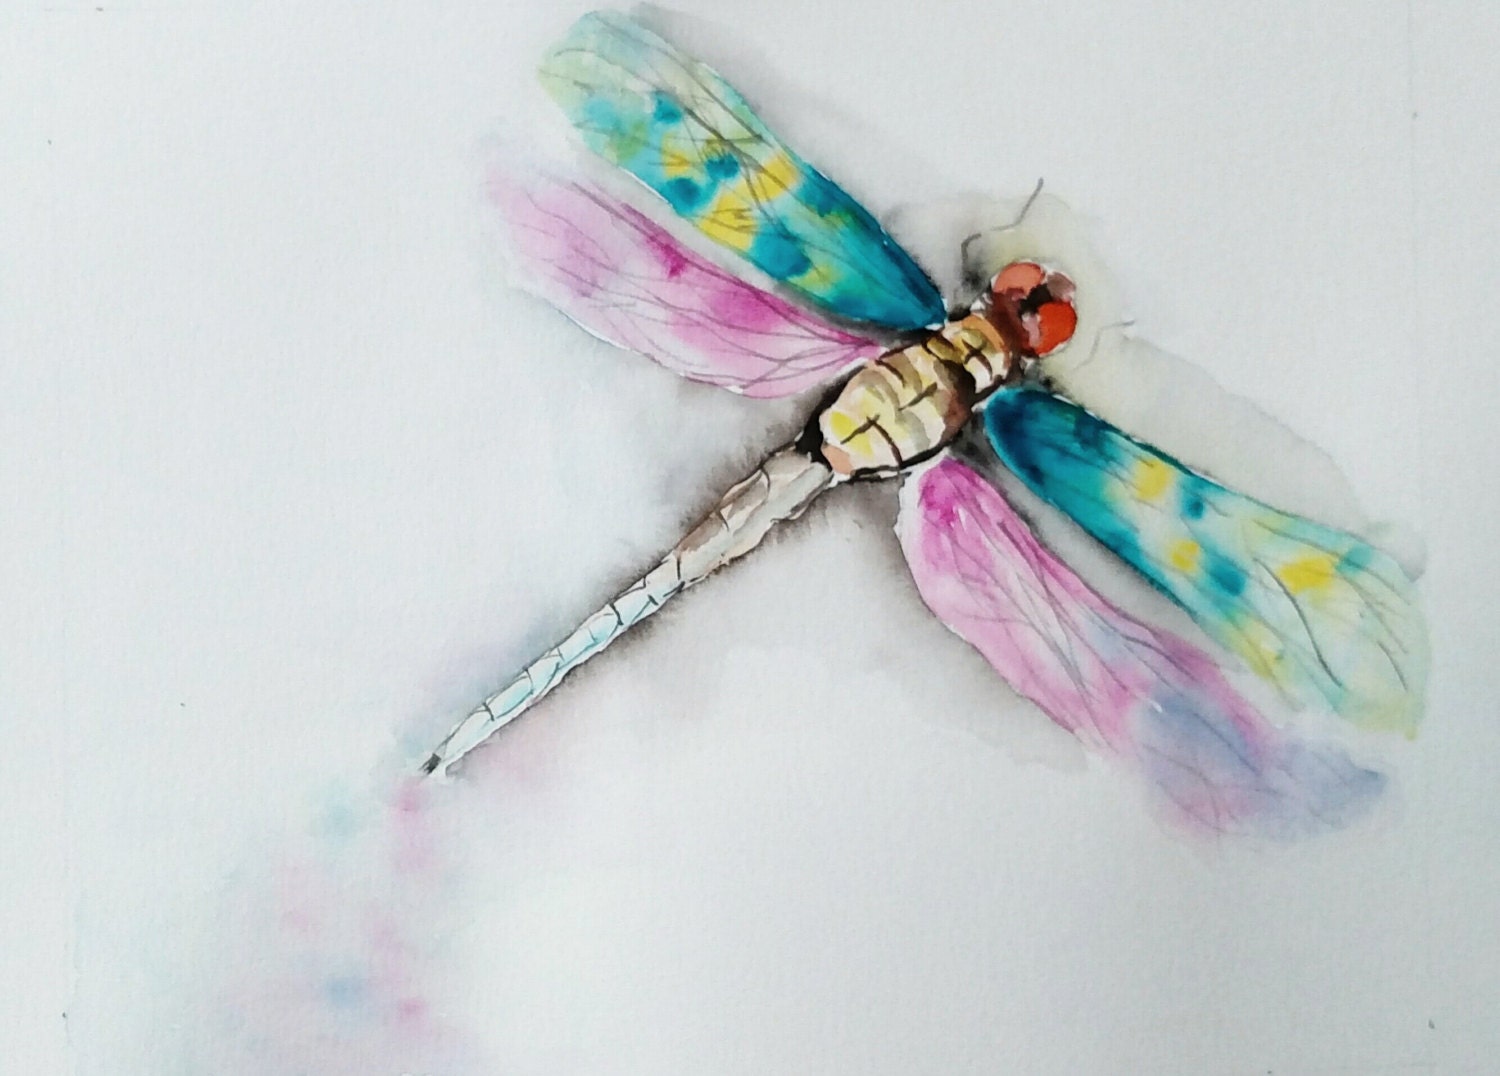 Dragonfly Art / Dragonfly Watercolor Painting/ Original